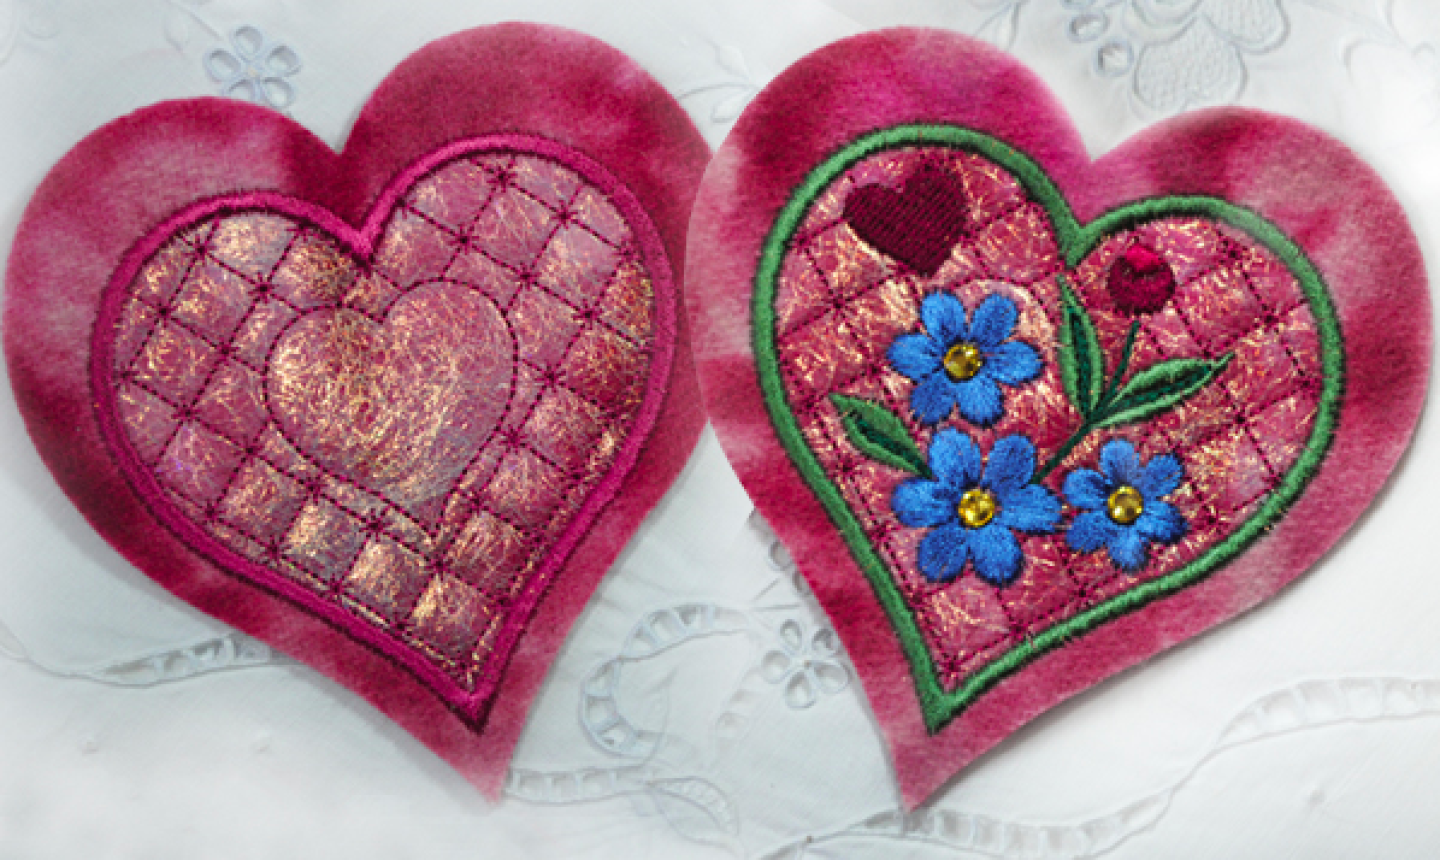 finished embroidered shiny hearts